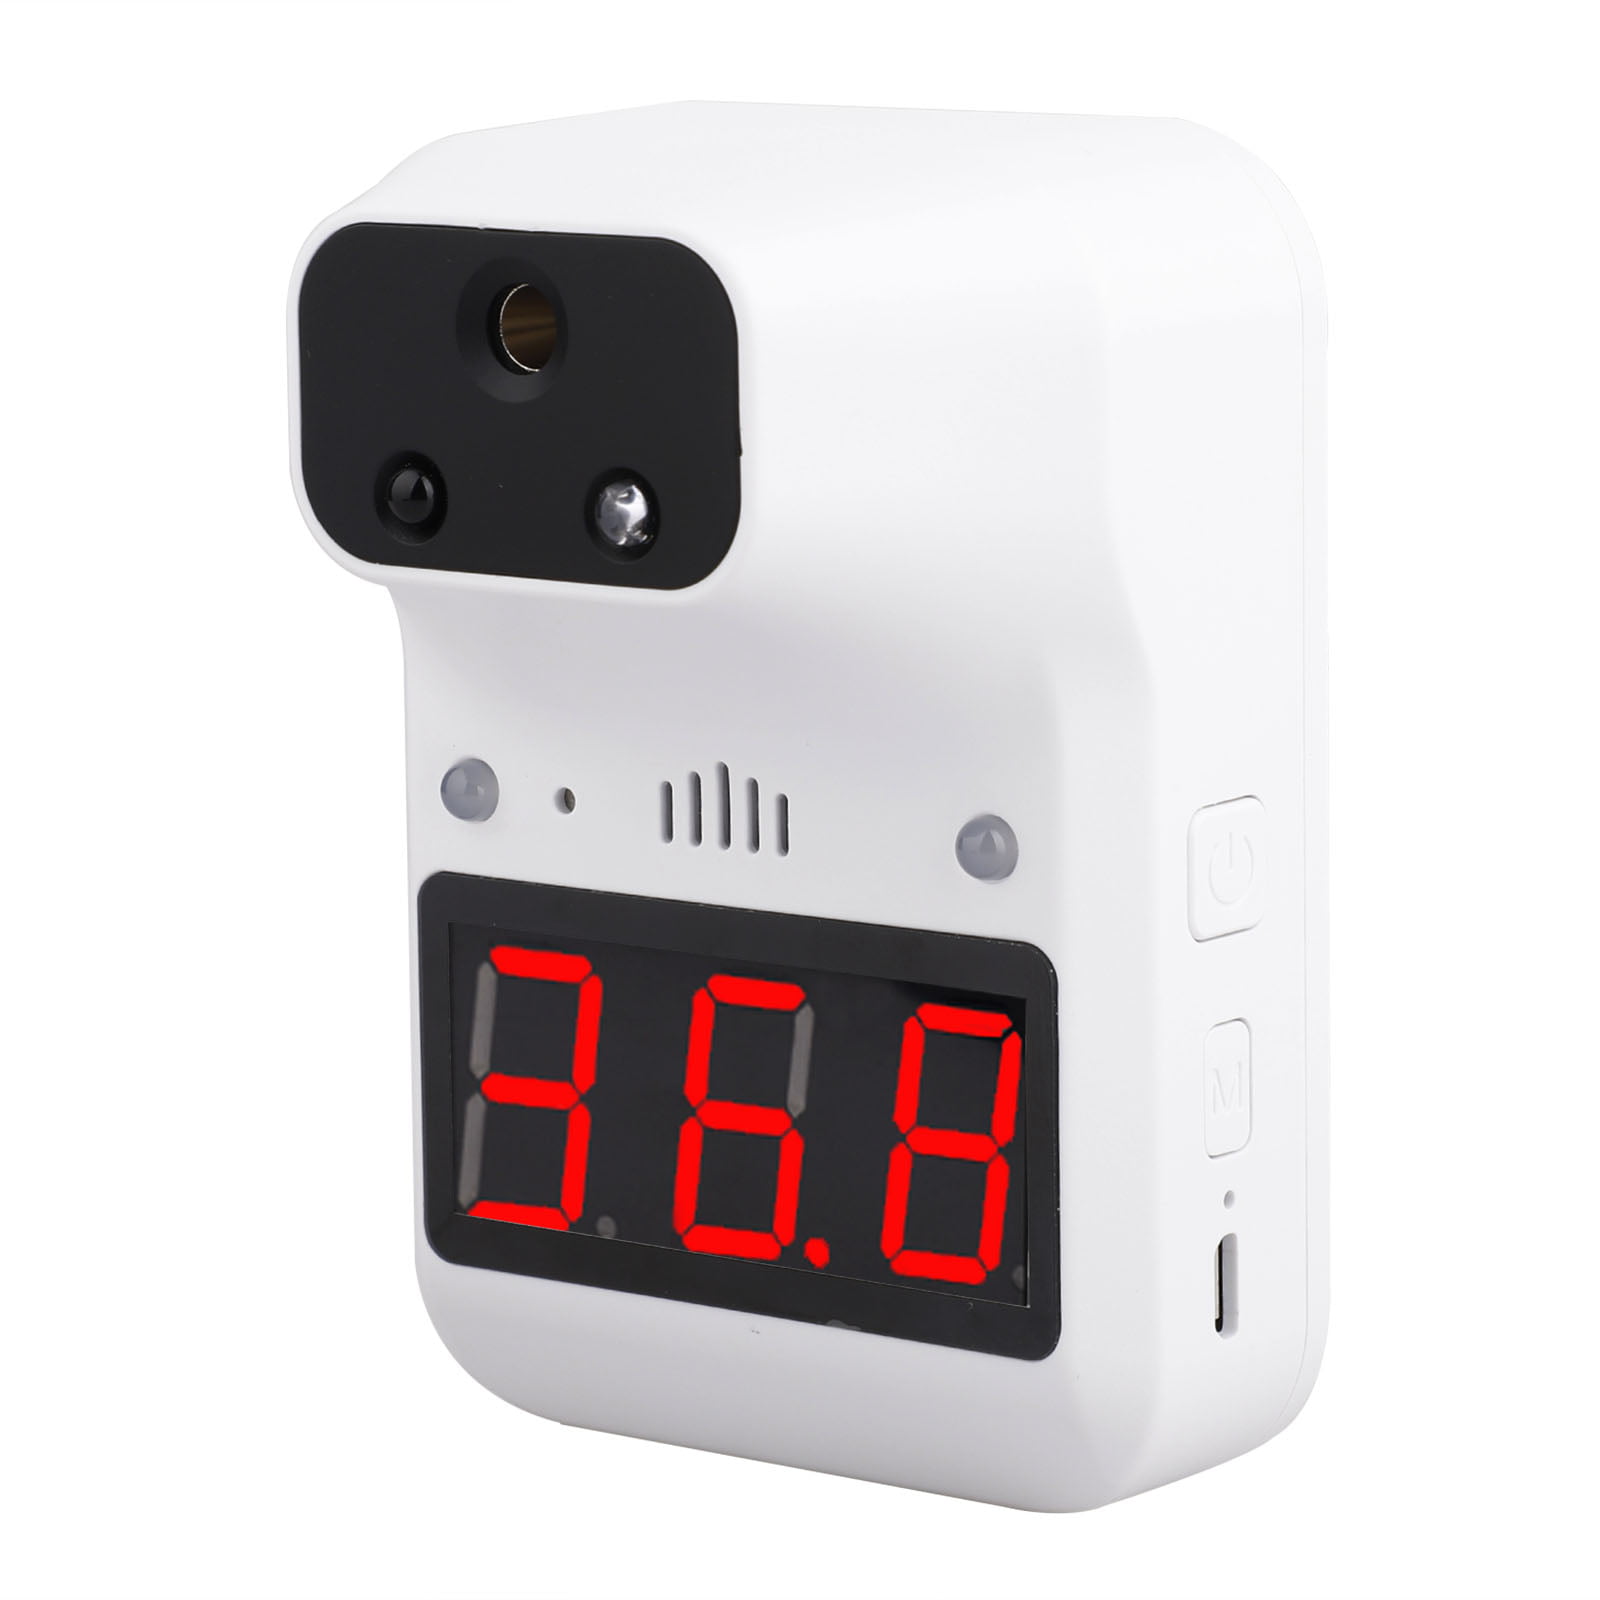 Bluetooth Wall-Mounted Infrared Thermometer: SIFROBOT-7.6